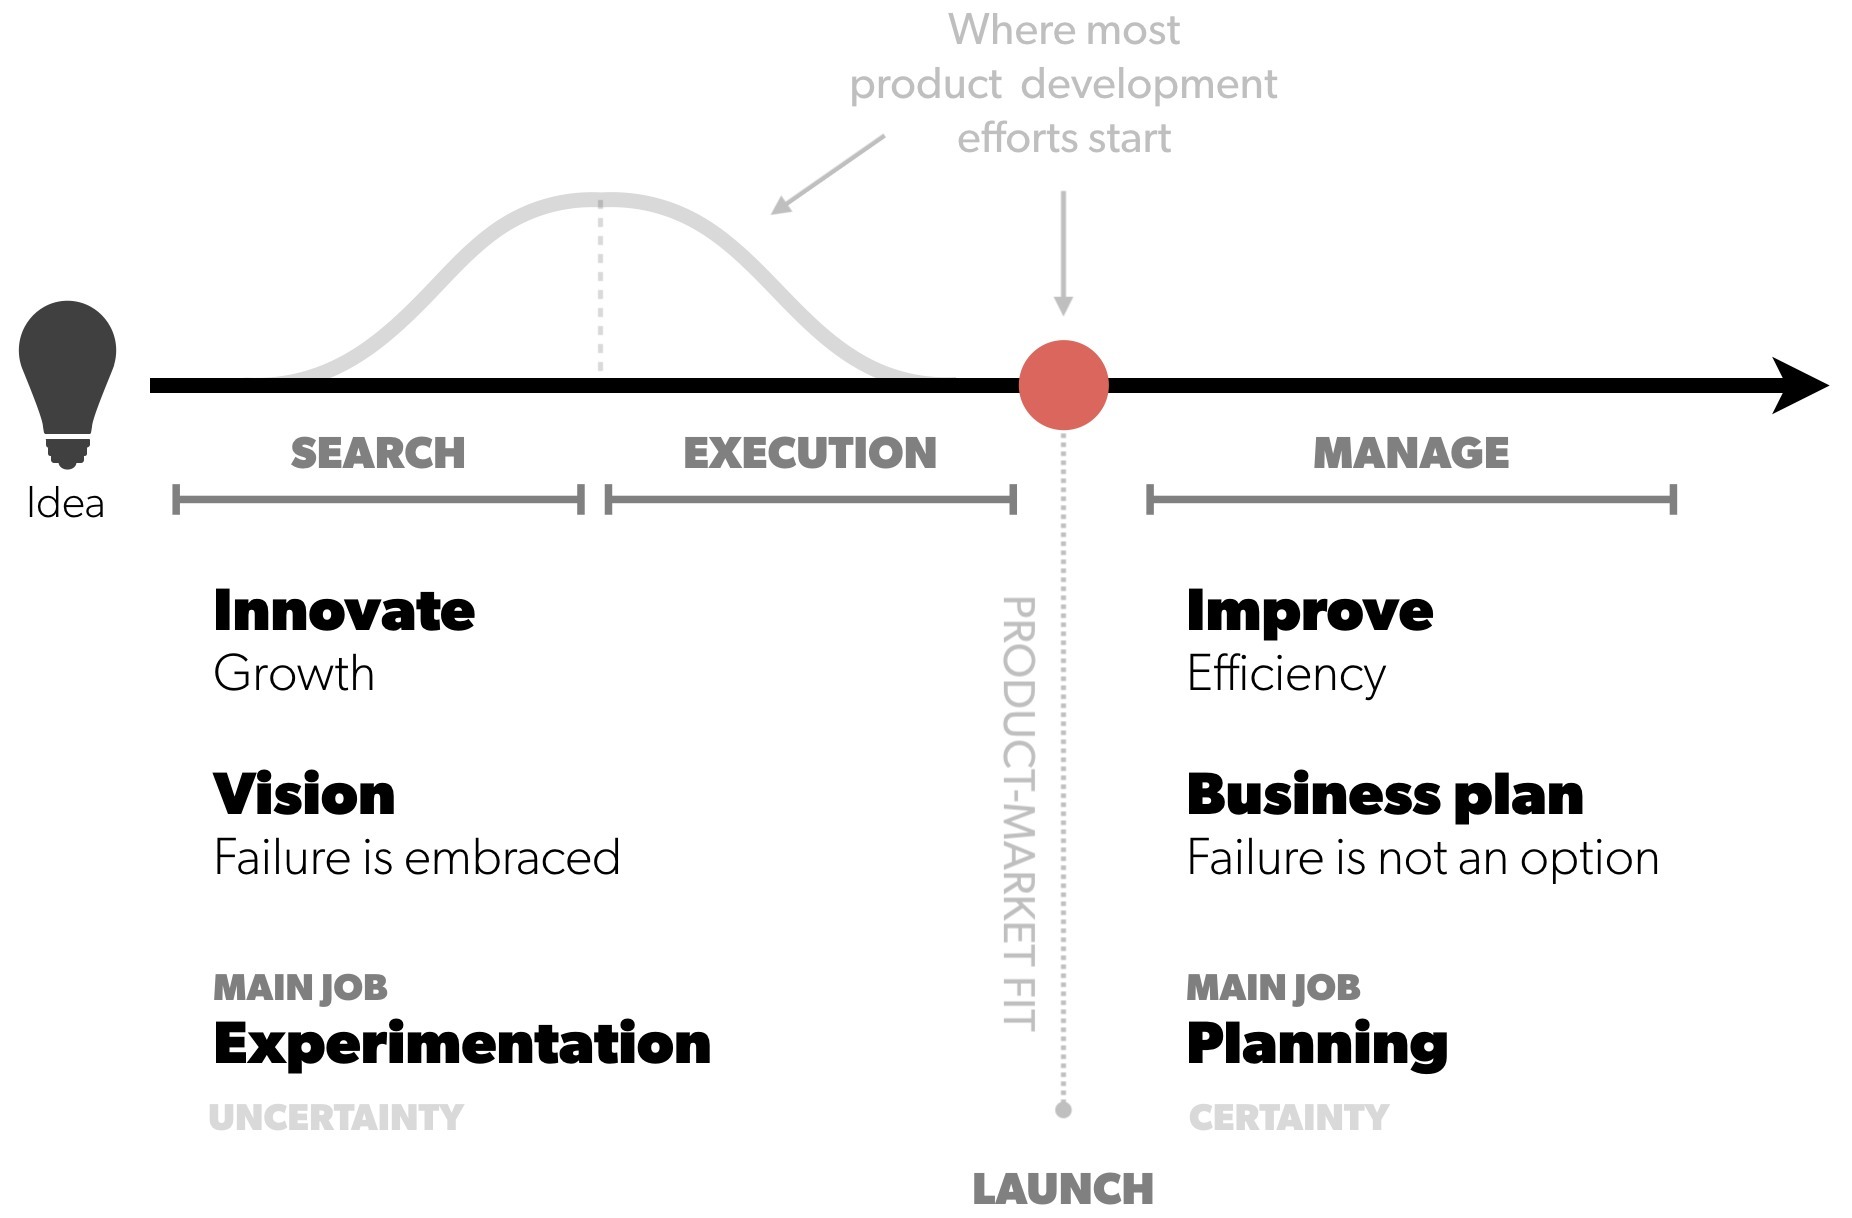 Too many starts up and enterprises start out assuming product success - as if they already have an succesful product. This leads to adopting the faulty mindset of efficiency rather than that of innovation. They end up focusing on planning rather than experimentation with the result of implementing something nobody wants.